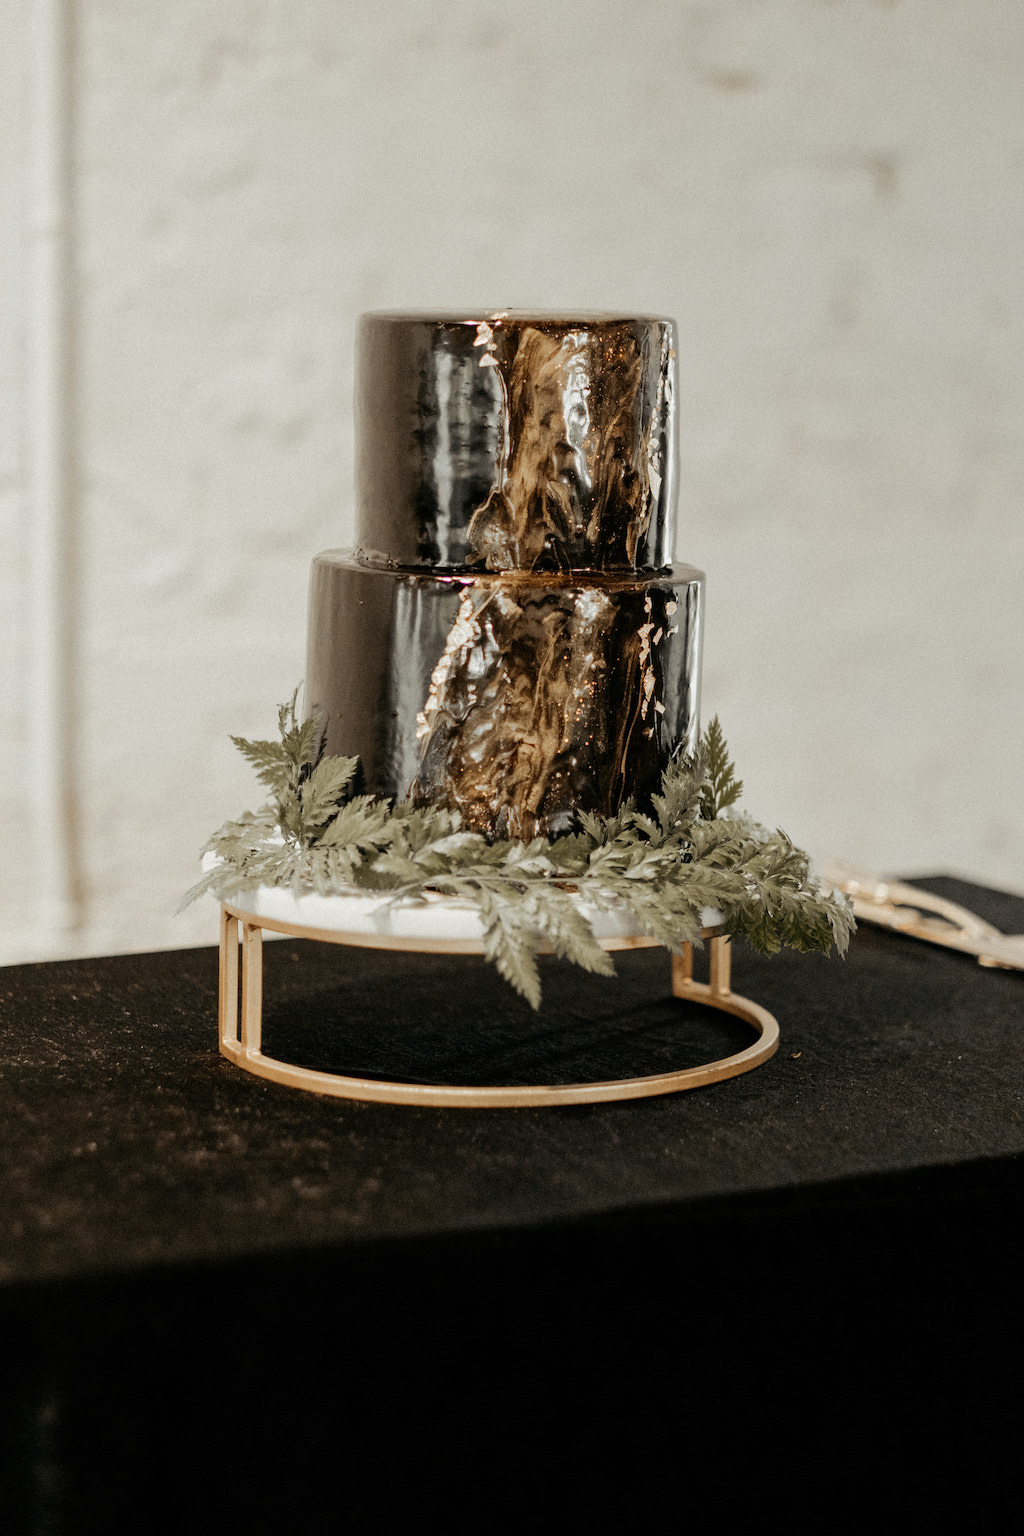 Two Tier Black and Gold Marble Cake with Greenery Wreath on White and Gold Cake Stand and Black Linen Table